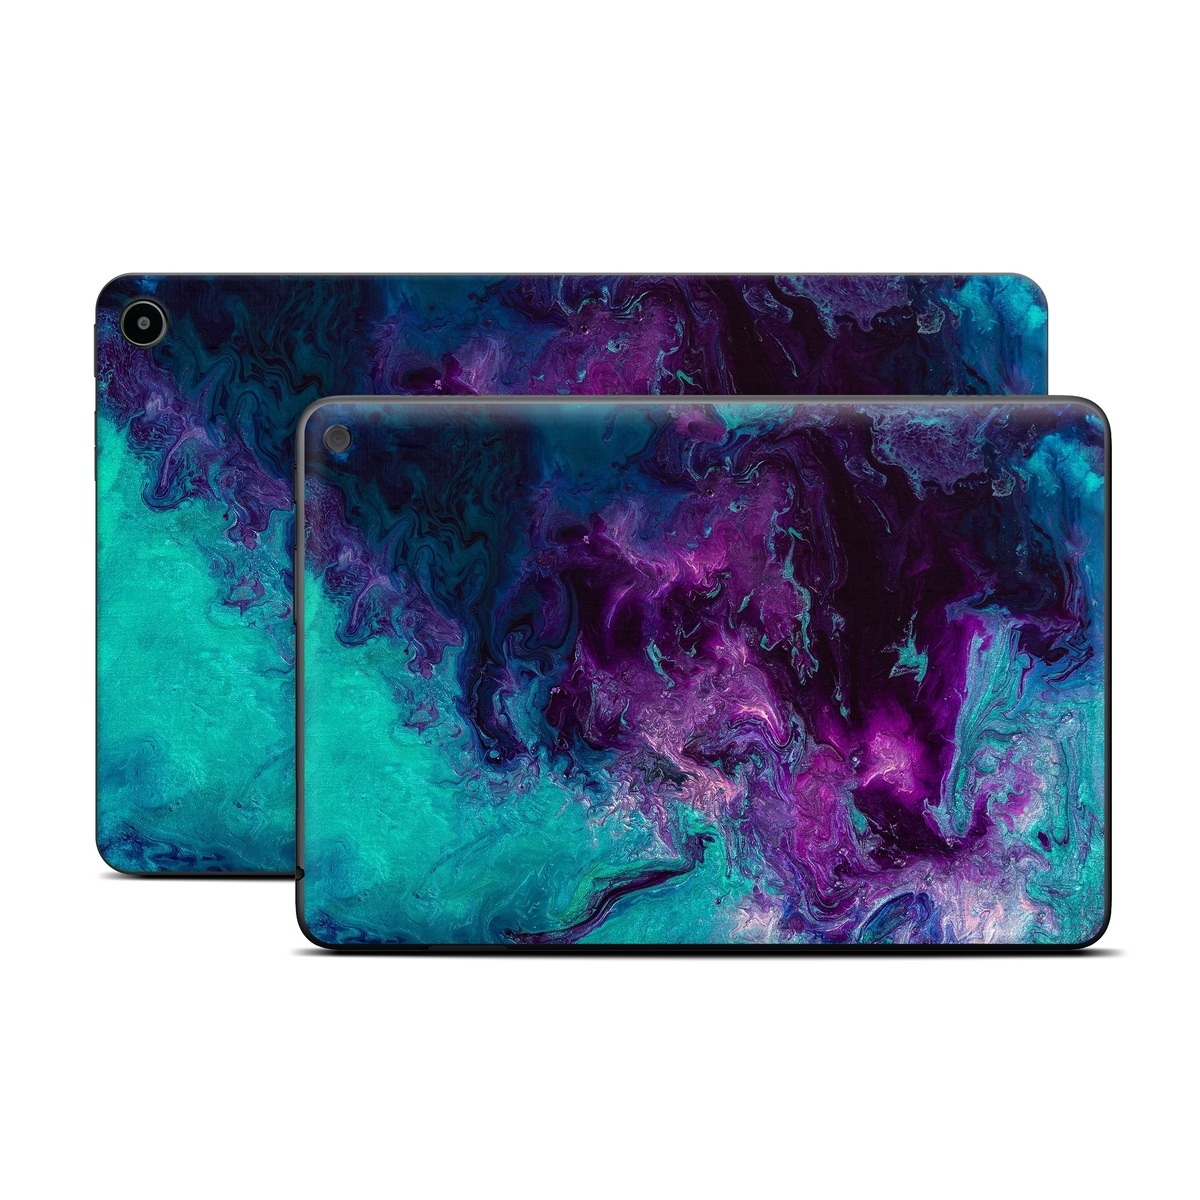 Amazon Fire Tablet Series Skin Skin design of Blue, Purple, Violet, Water, Turquoise, Aqua, Pink, Magenta, Teal, Electric blue, with blue, purple, black colors